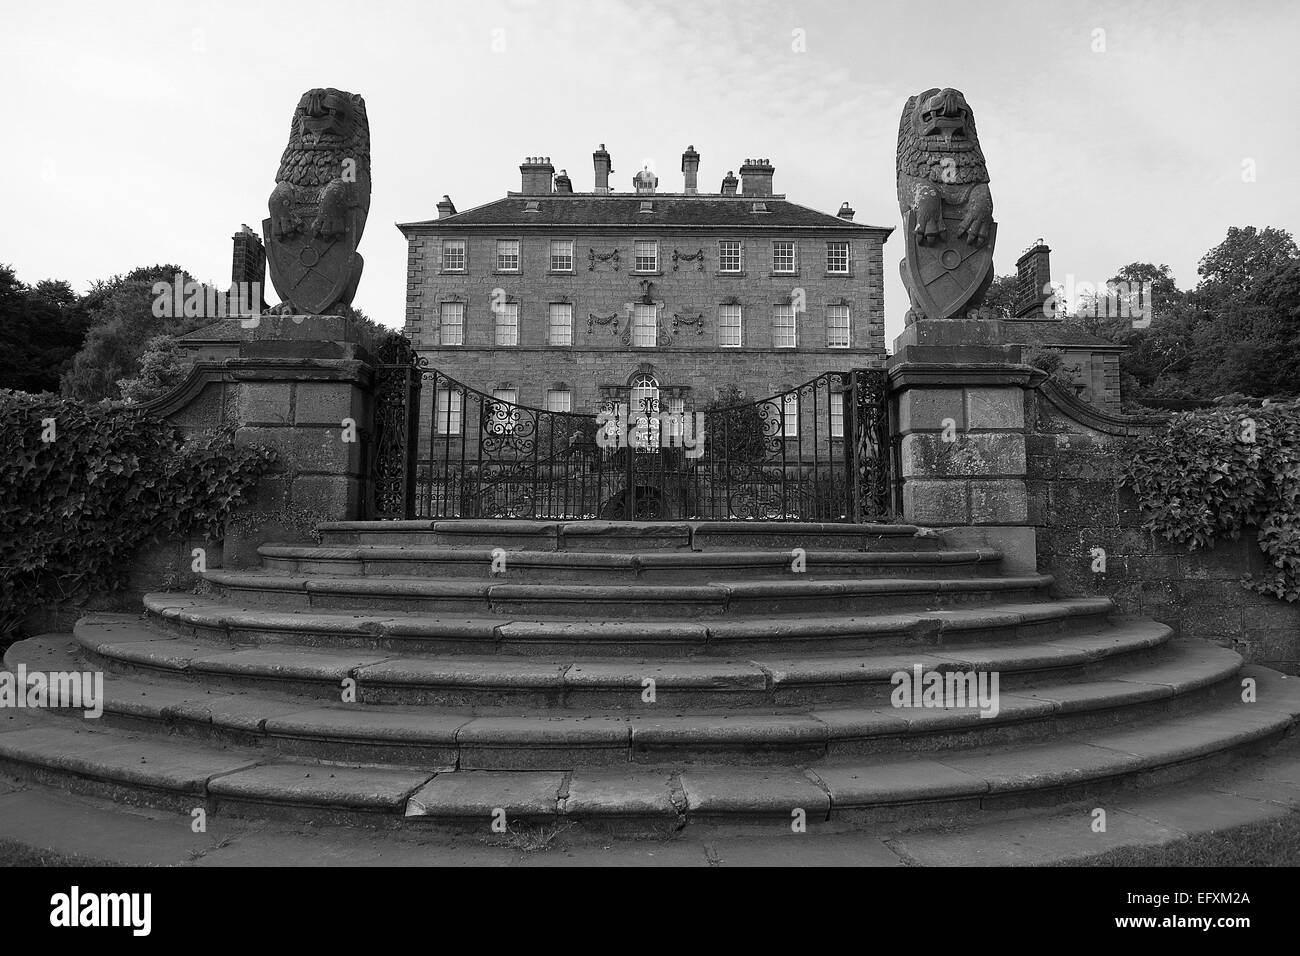 Pollok House in Glasgow, view from the front Stock Photo